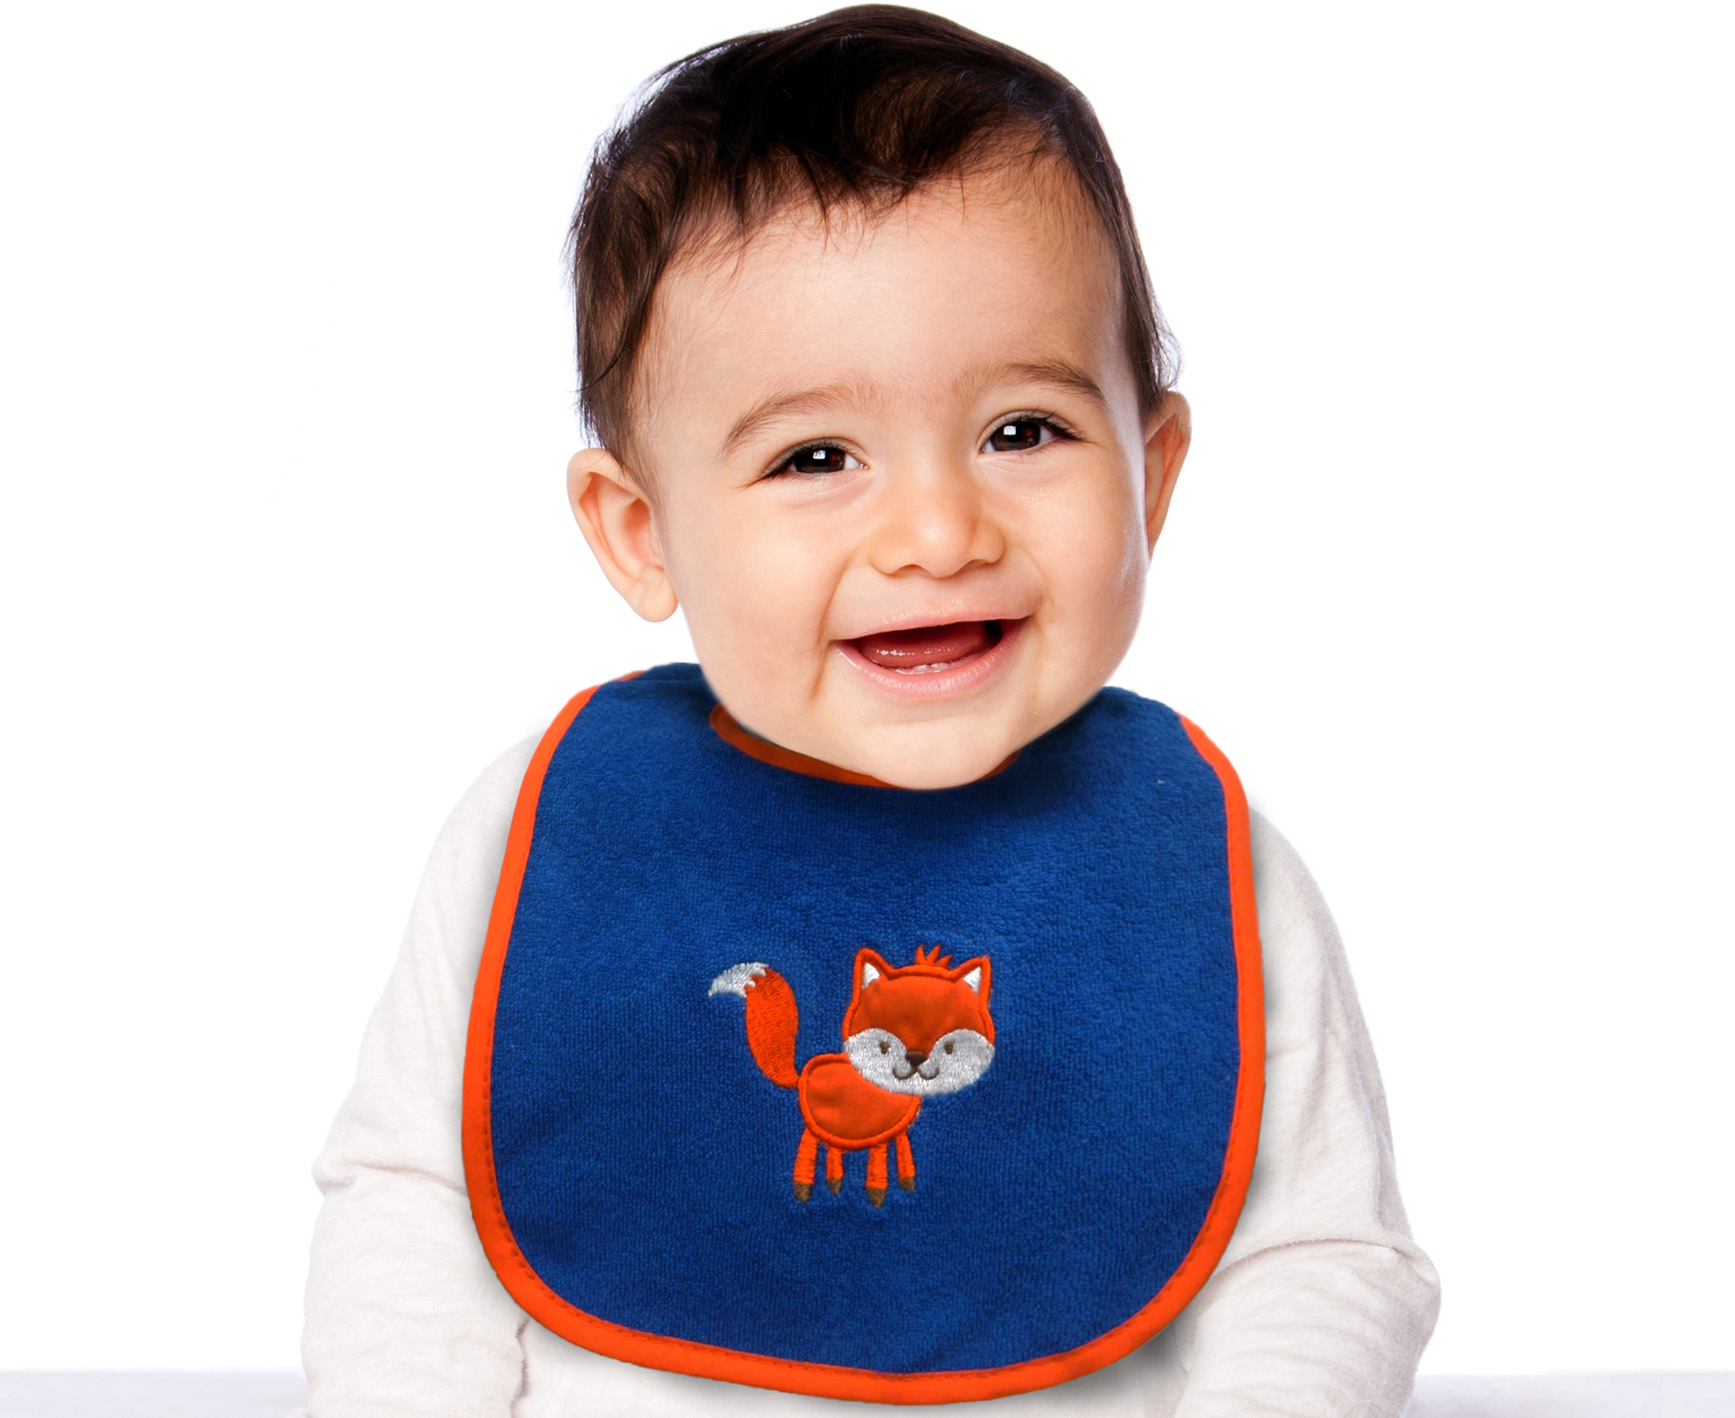 Neat Solutions Cotton and Polyester Baby Bib, 10pk Boys - image 3 of 12